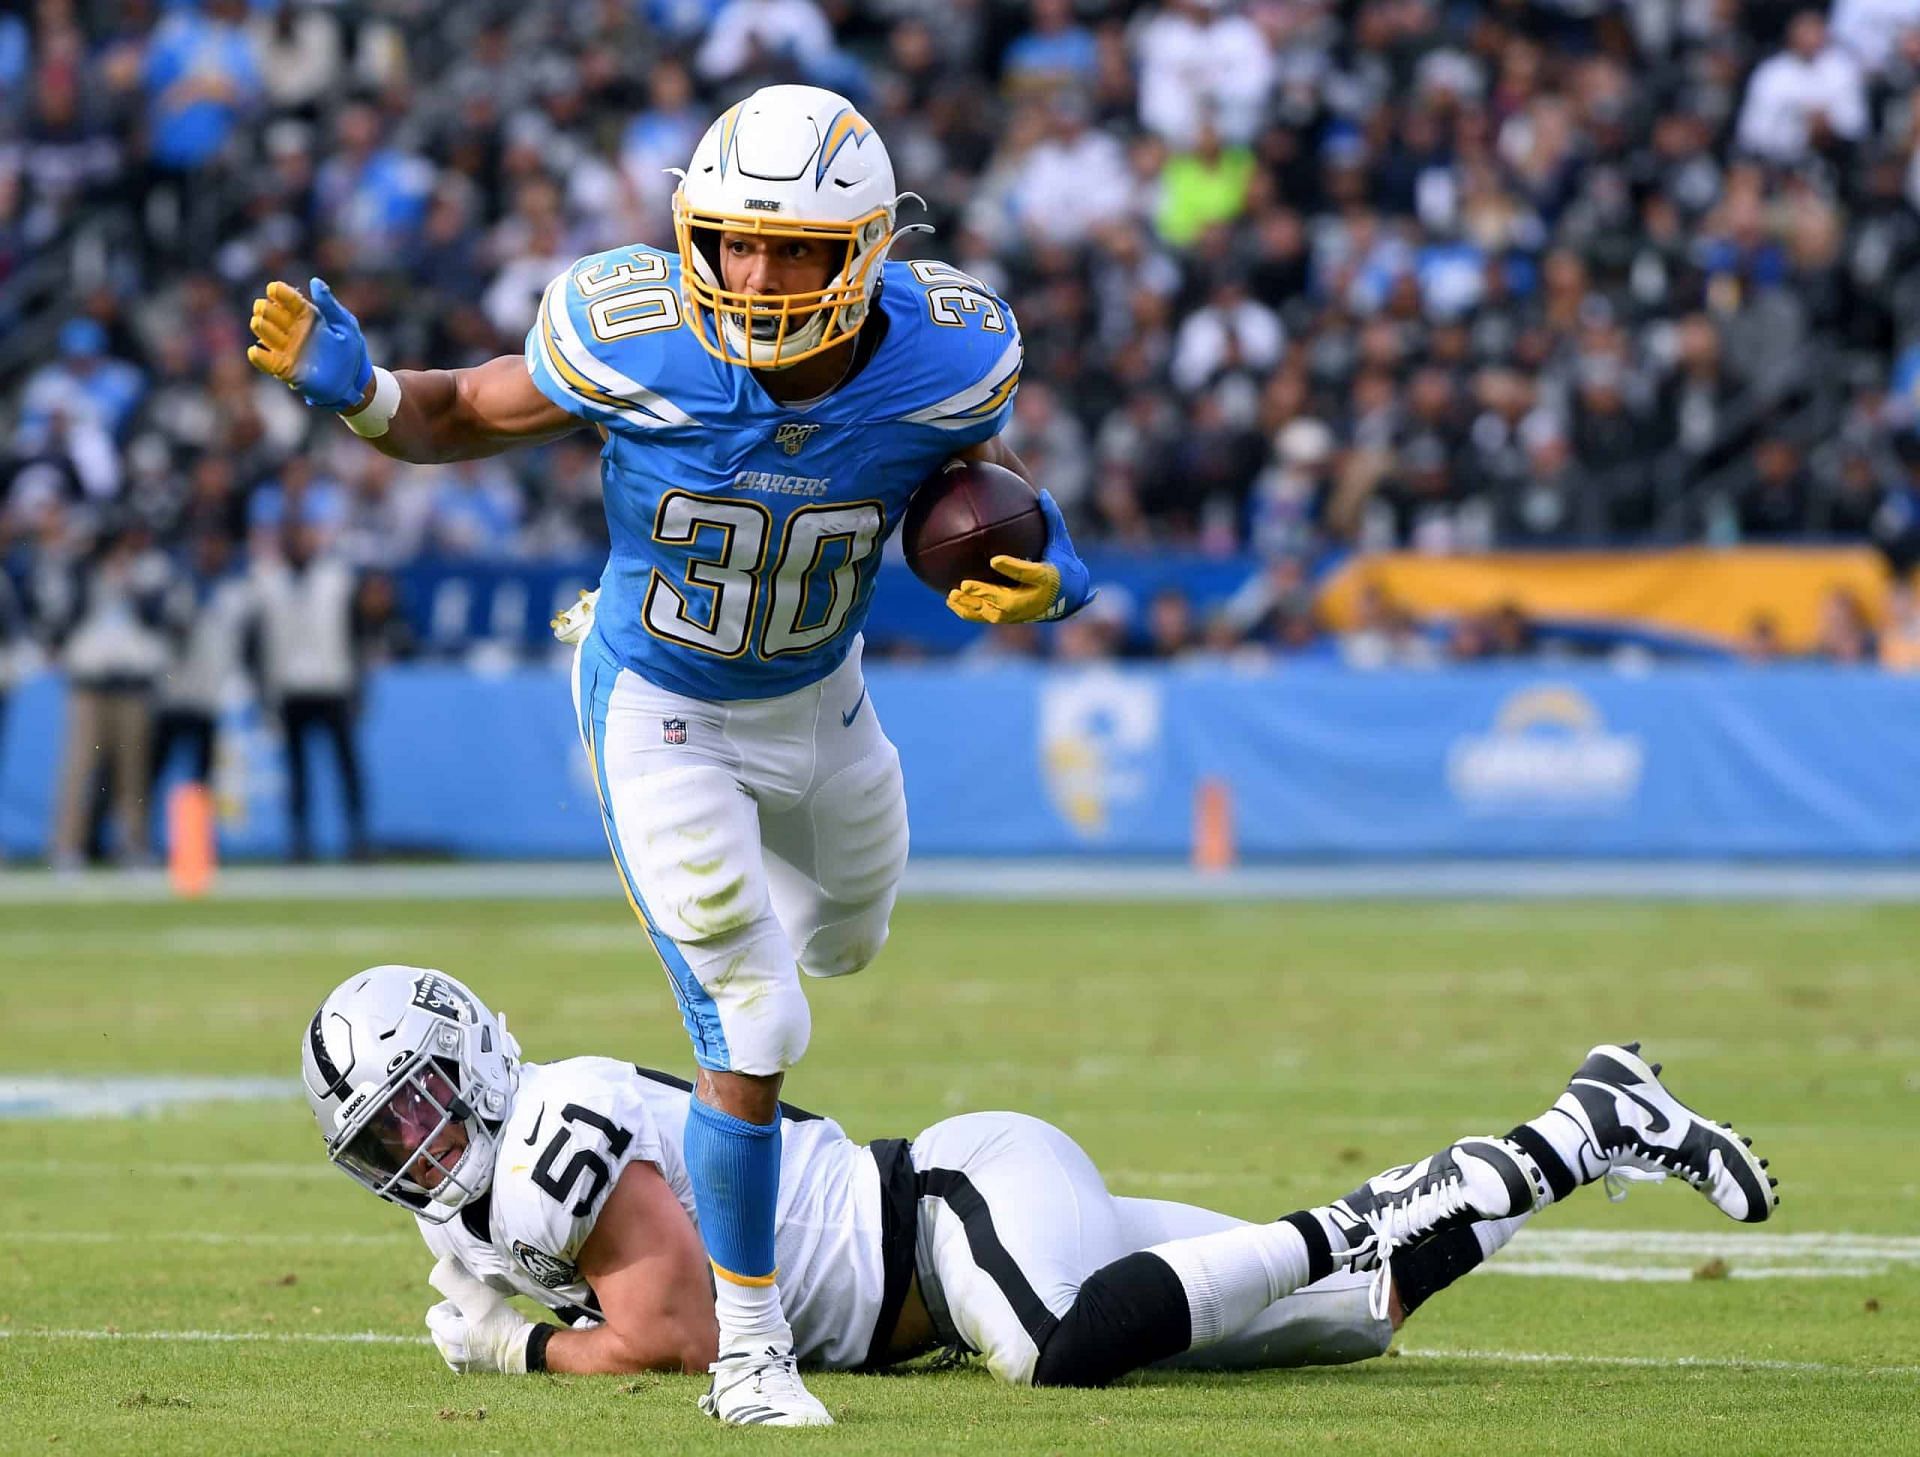 Can Austin Ekeler lead an injury-riddled Chargers over a surging Falcons team?